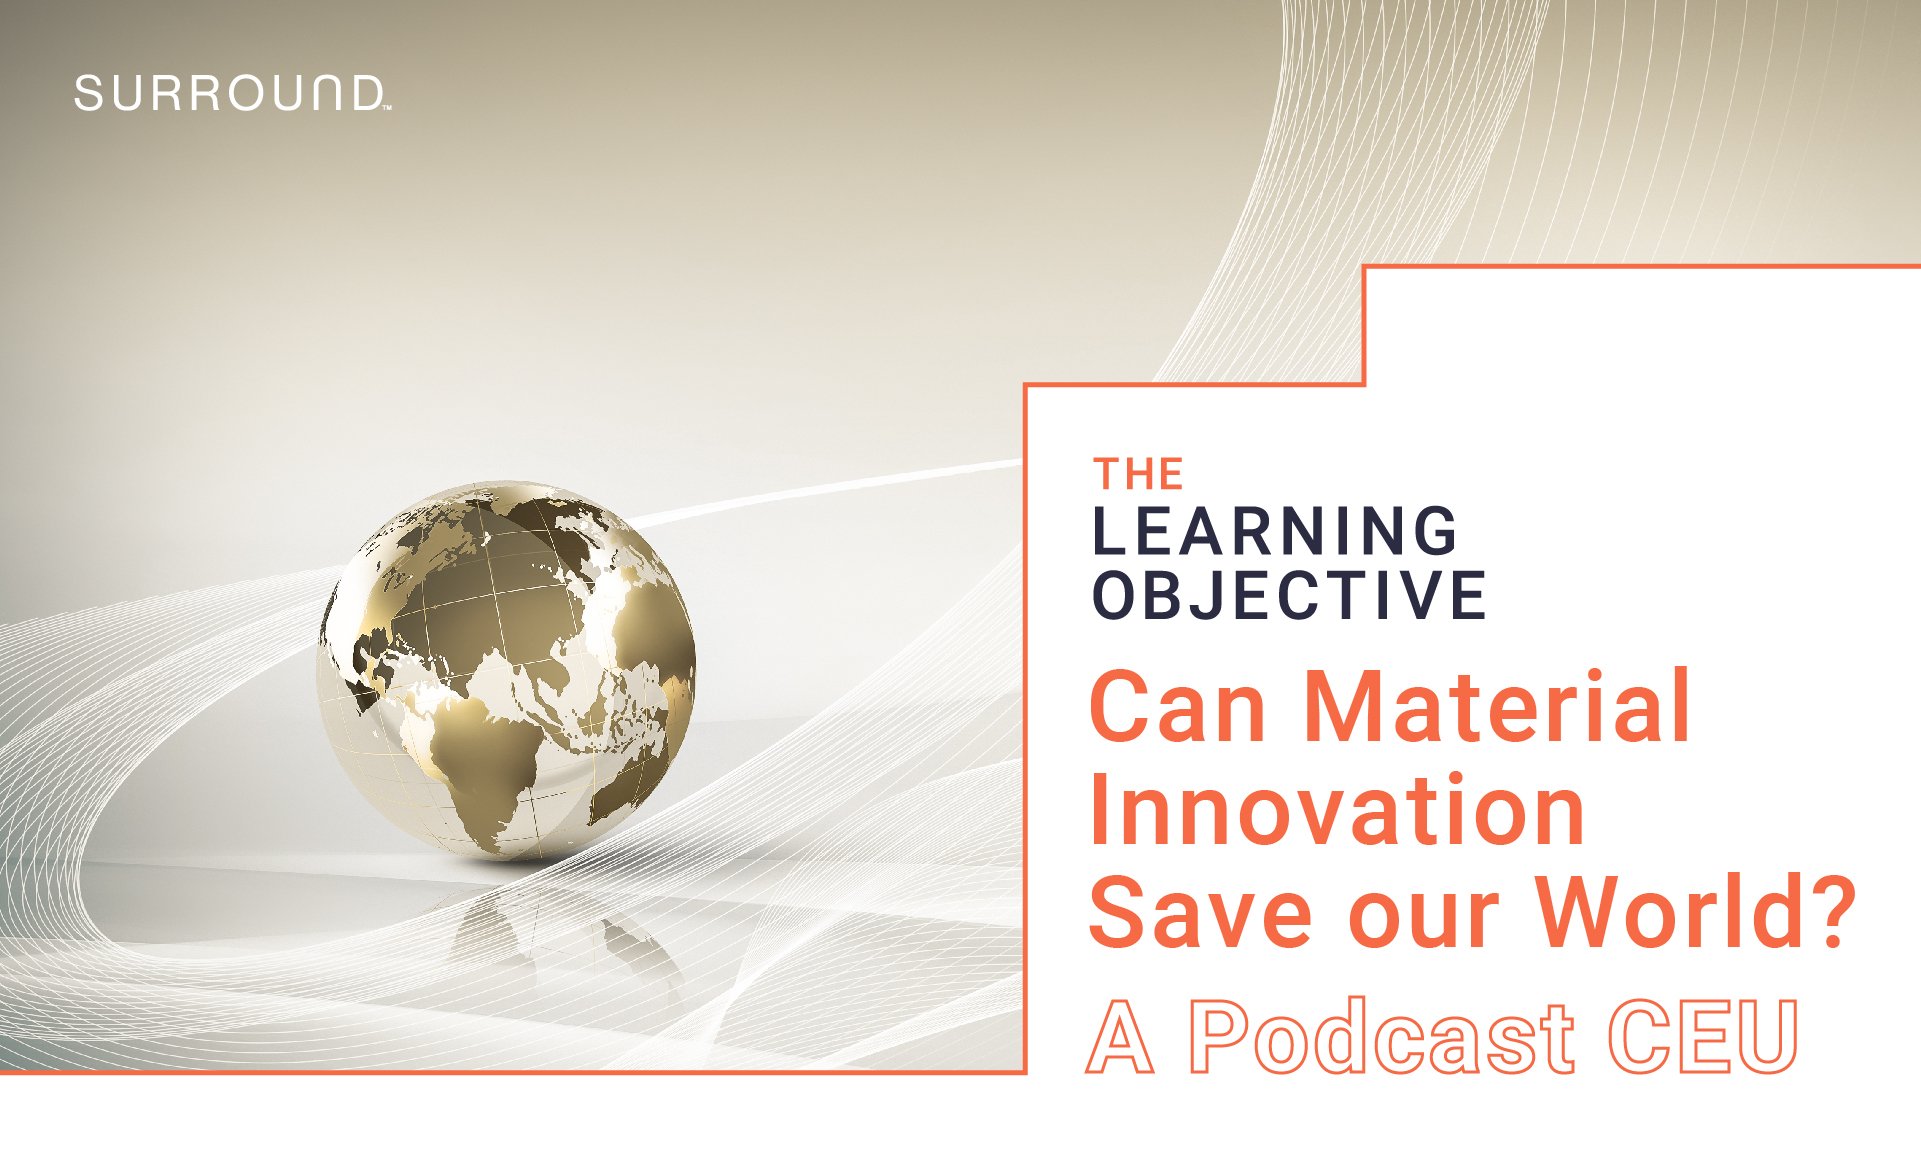 The learning objective CEU podcast episode from ThinkLab on material innovation.